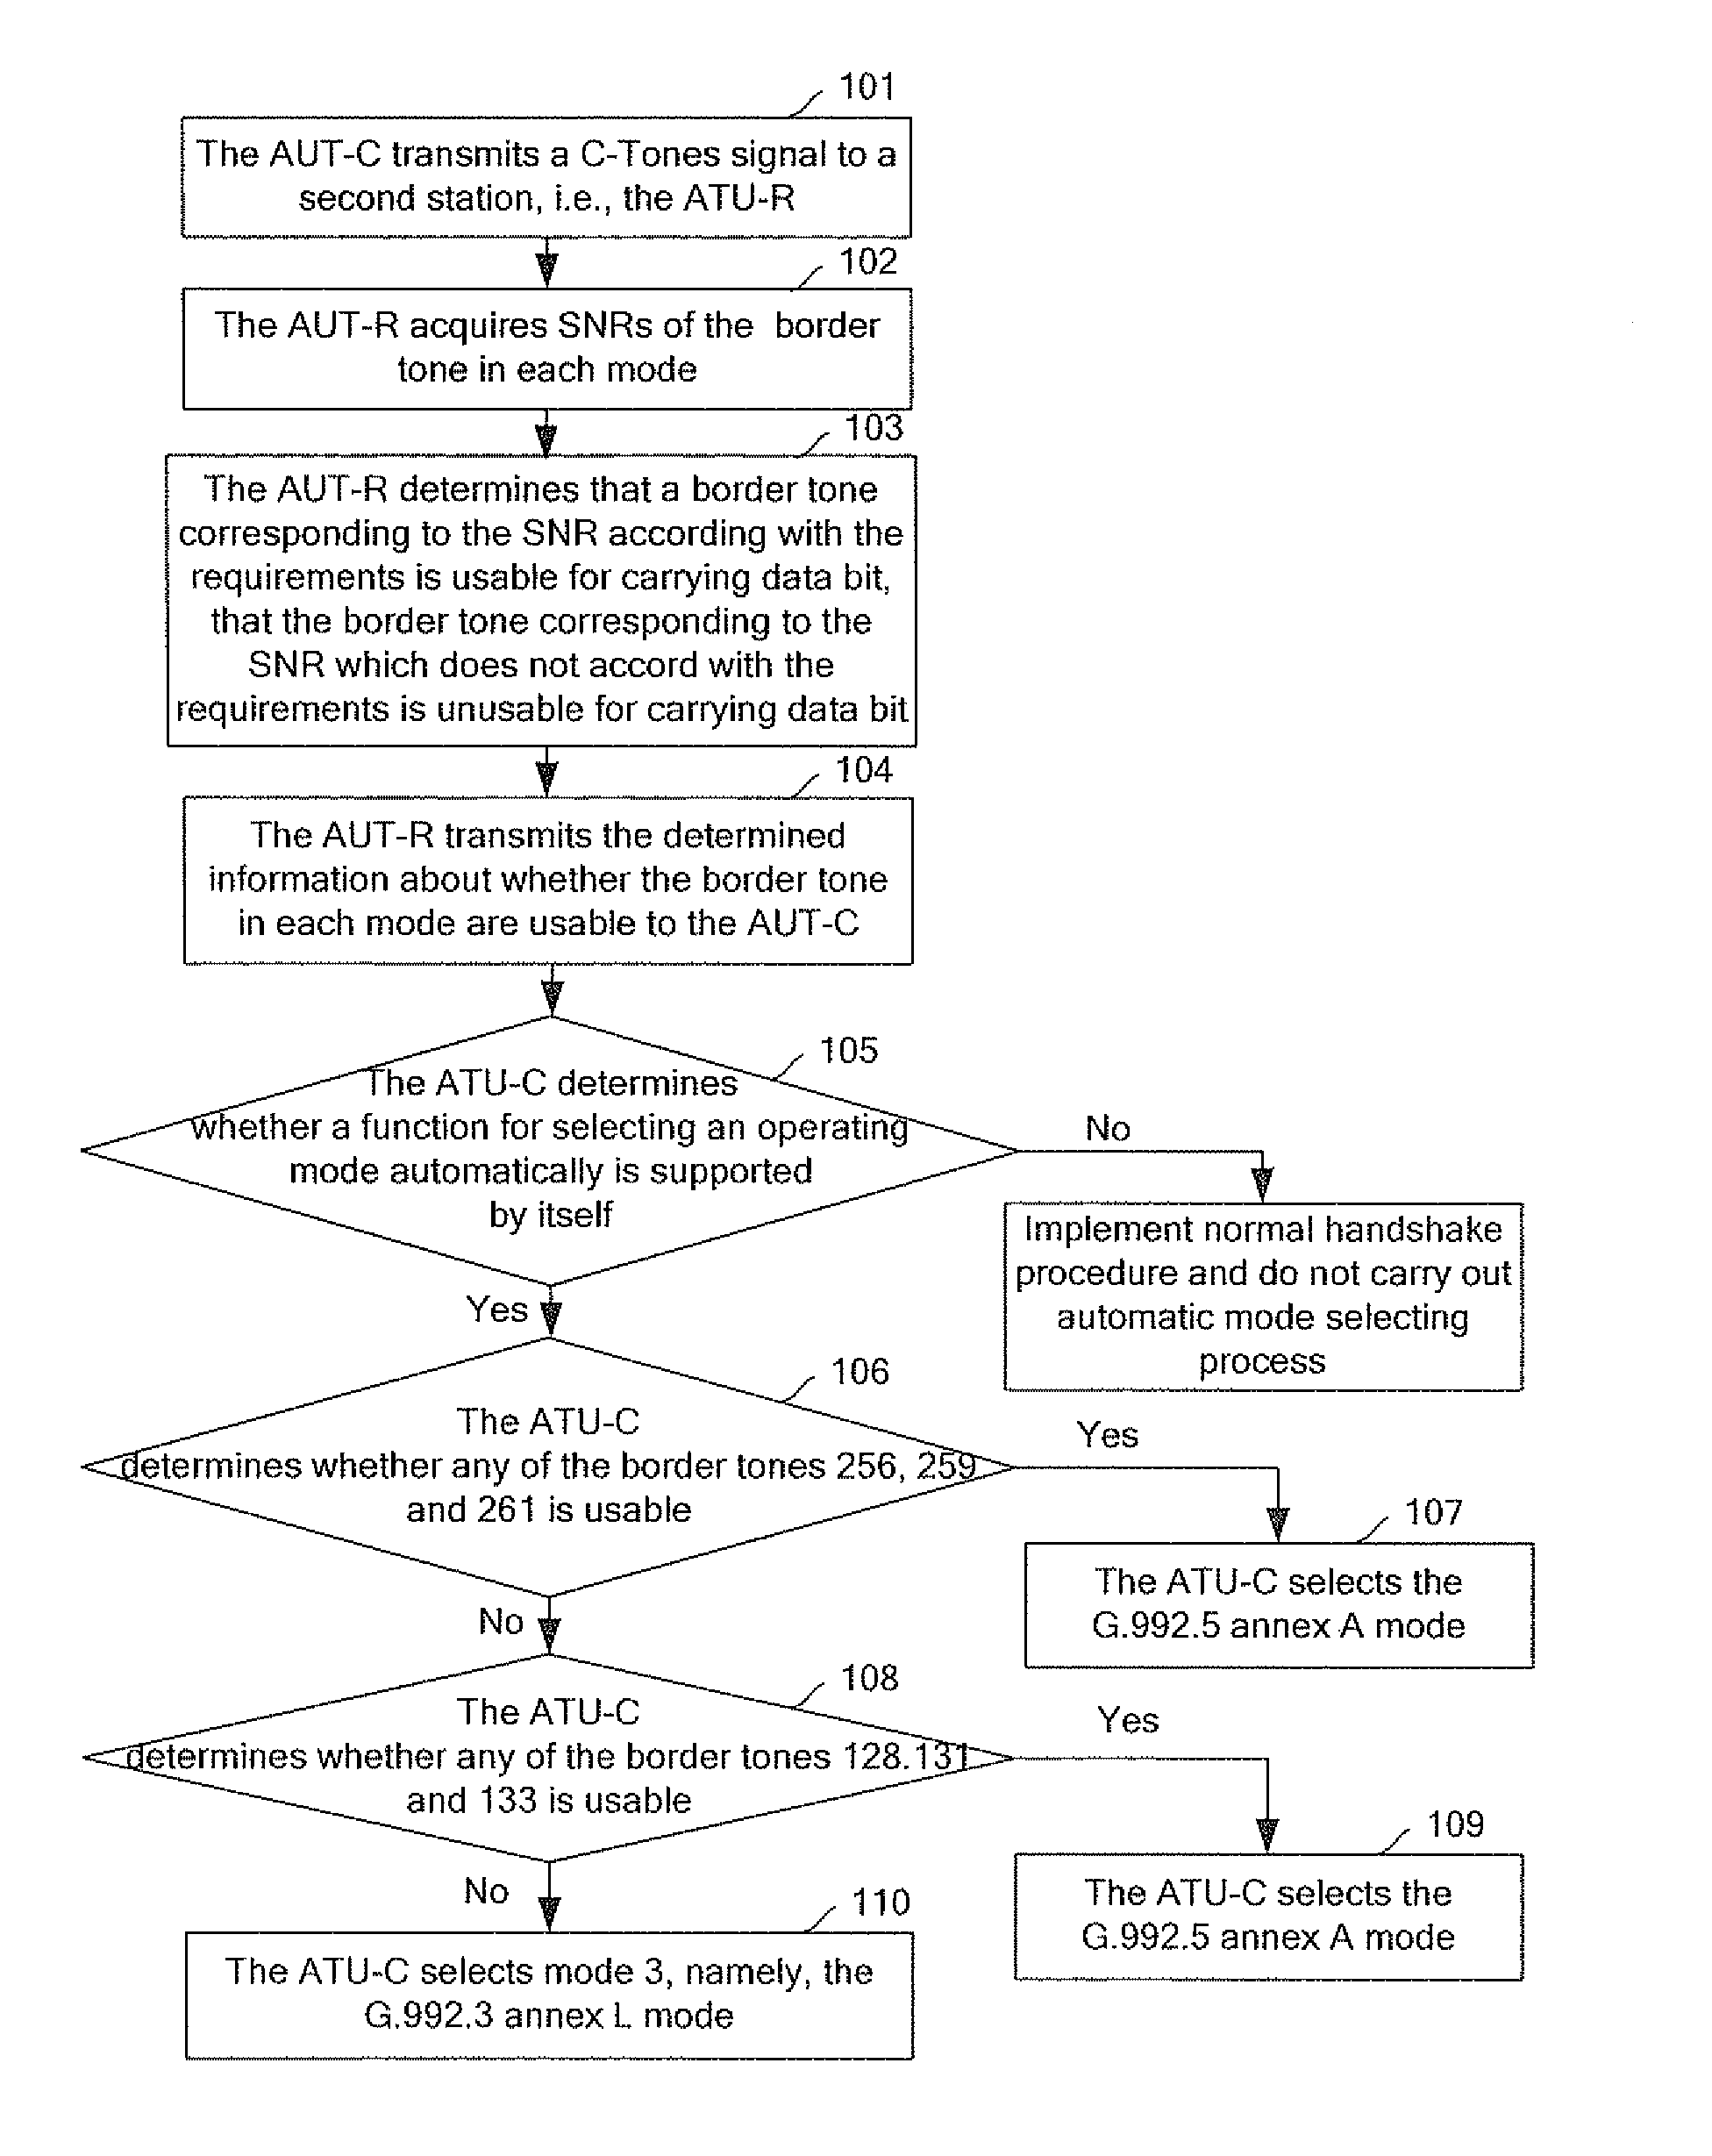 Method for selecting an operating mode automatically